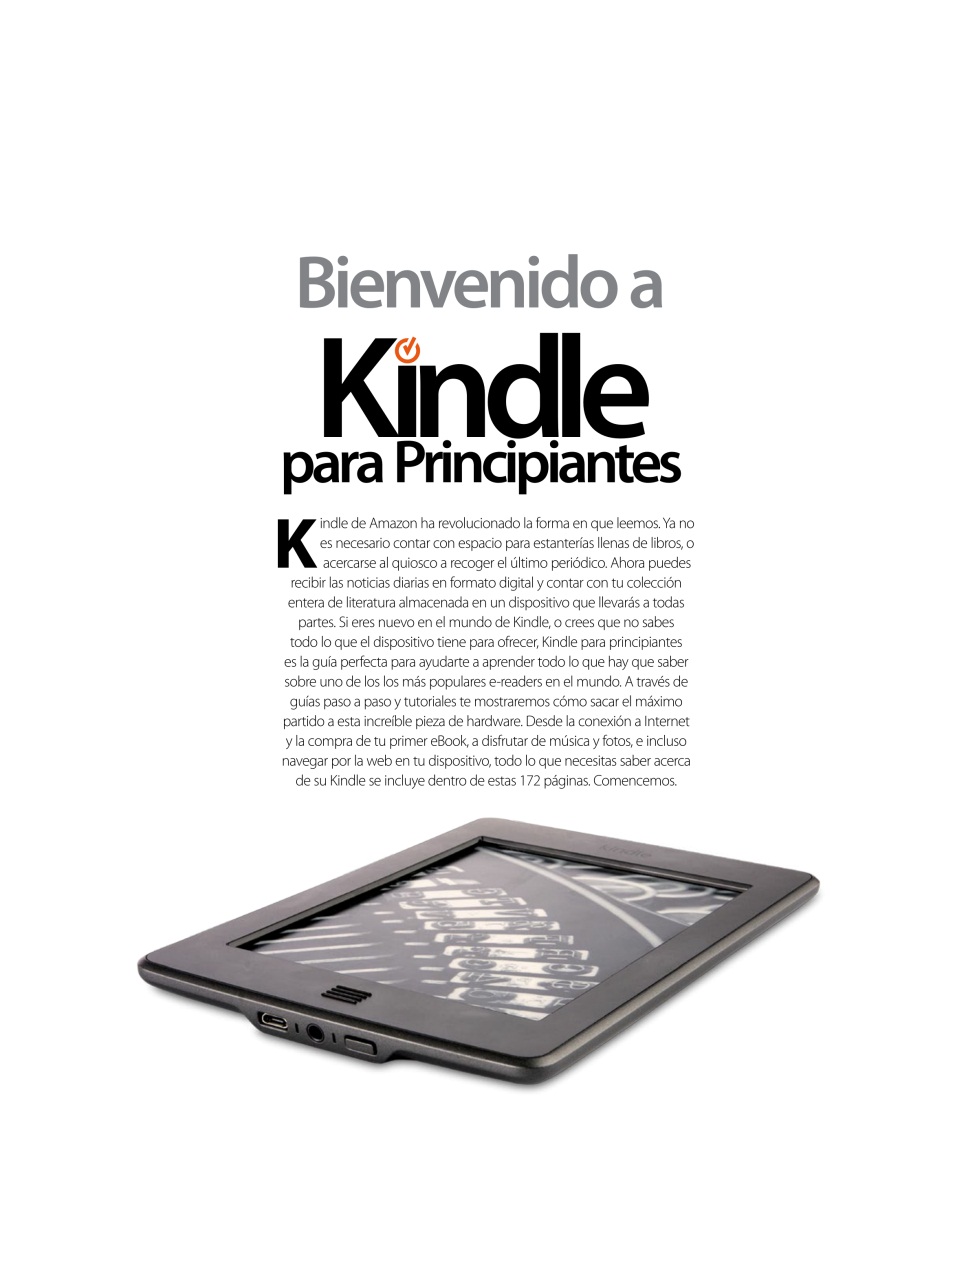 kindle previewer app no access